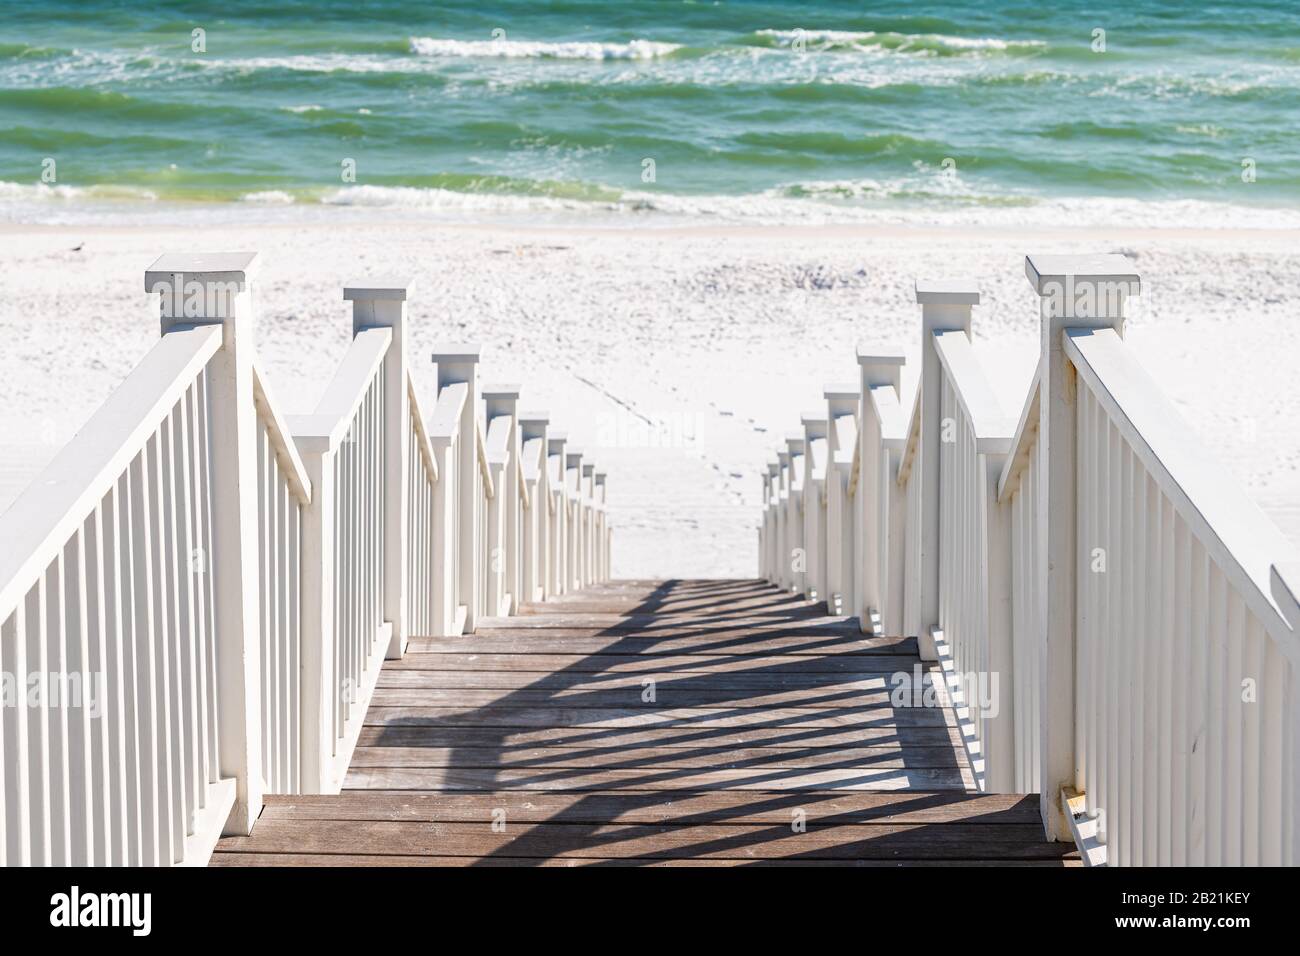 Seaside, Florida railing wooden pavilion walkway steps architecture by beach ocean background view down during sunny day Stock Photo